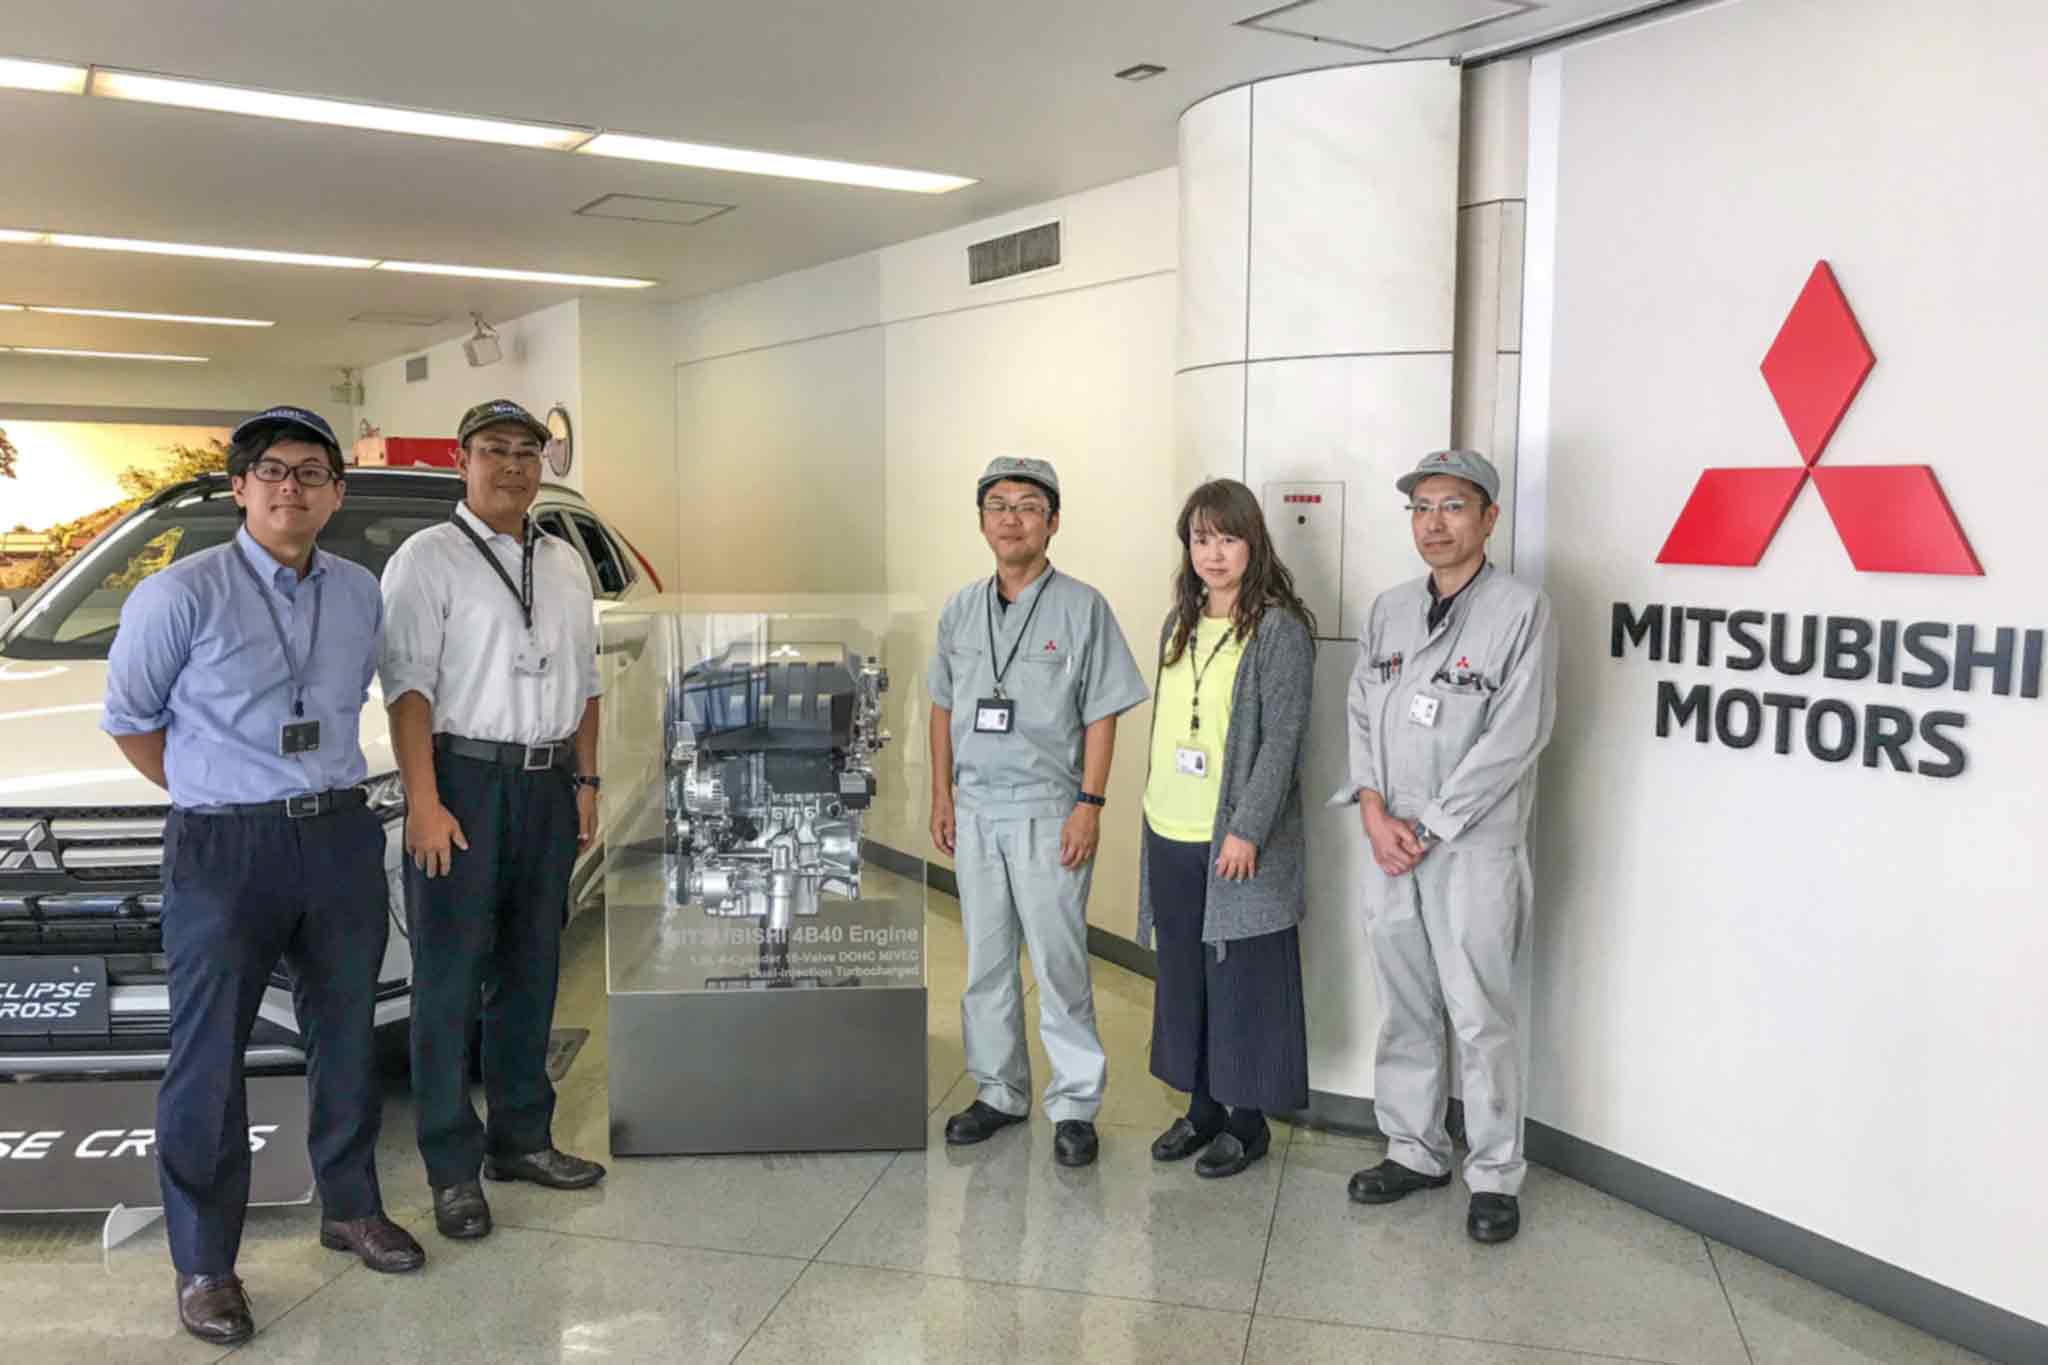 The Mitsubishi Motors logo is on the right. On the left, 5 people are standing around an engine. There’s a car in the background.